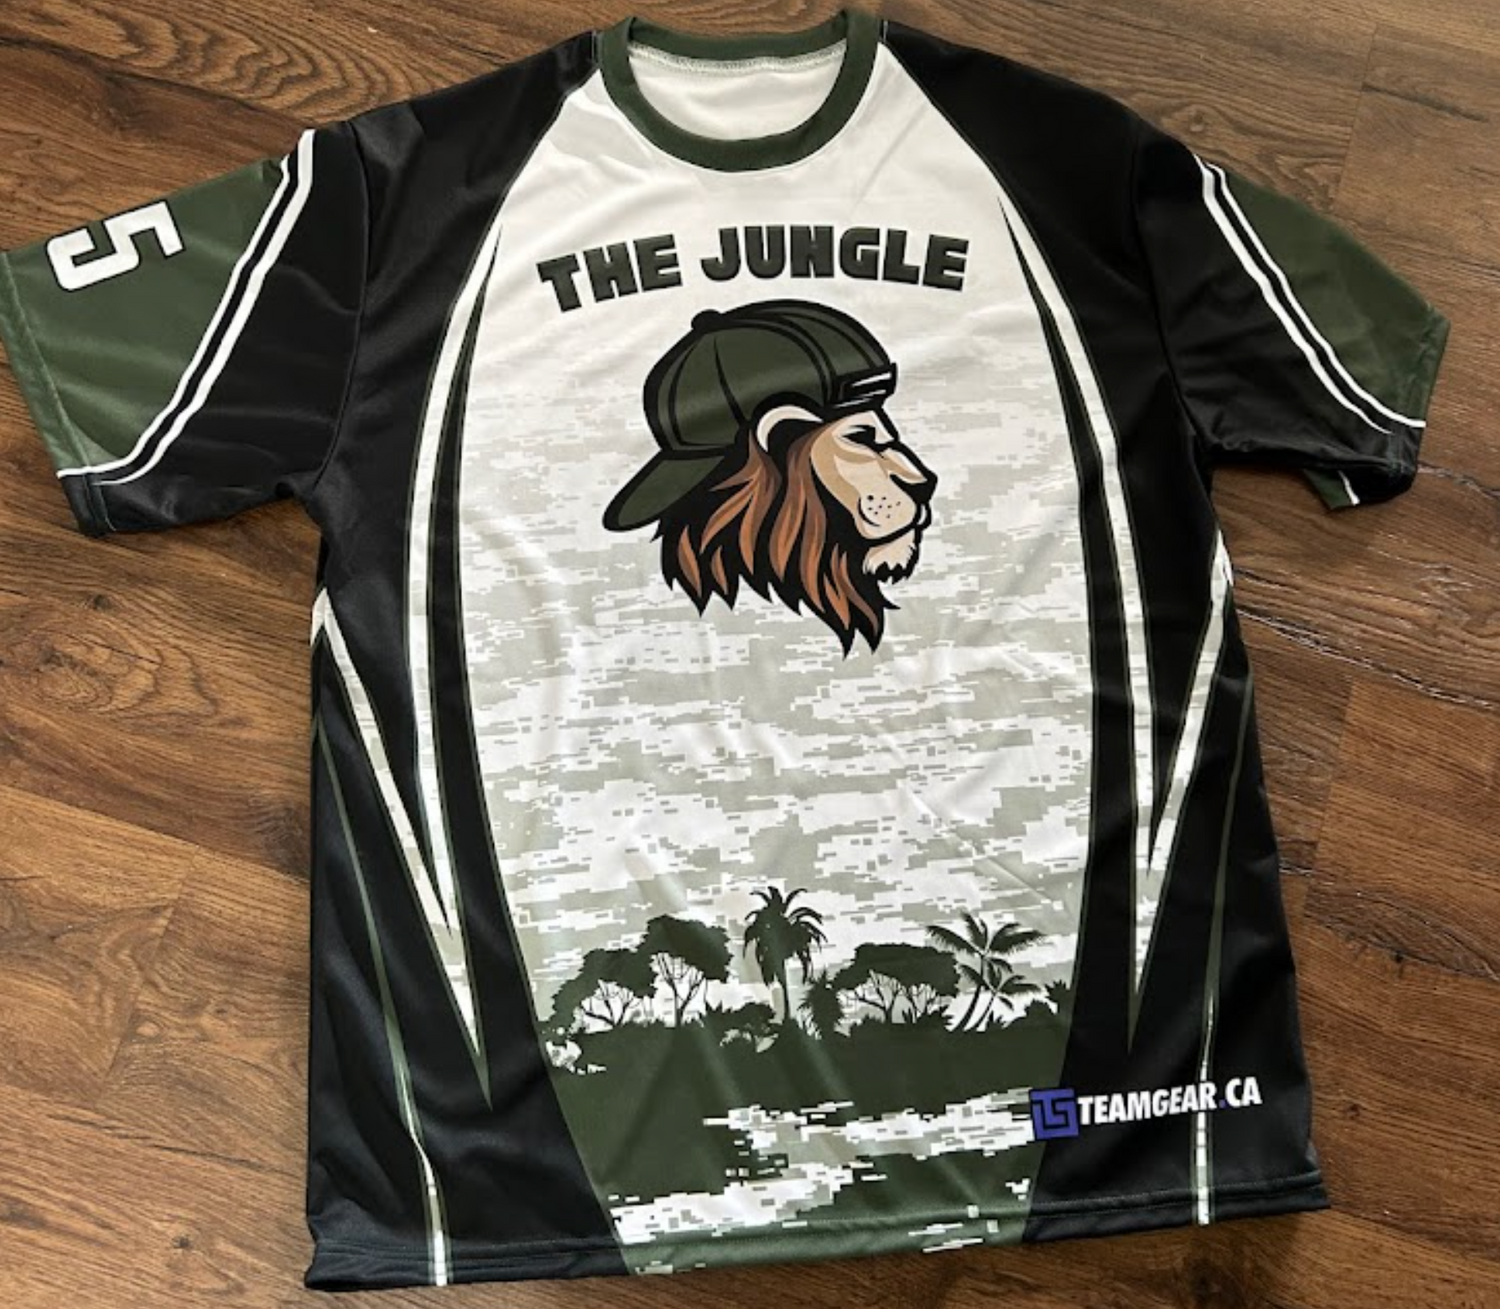 custom slo pitch jerseys for the Jungle team made in Canada by Team Gear